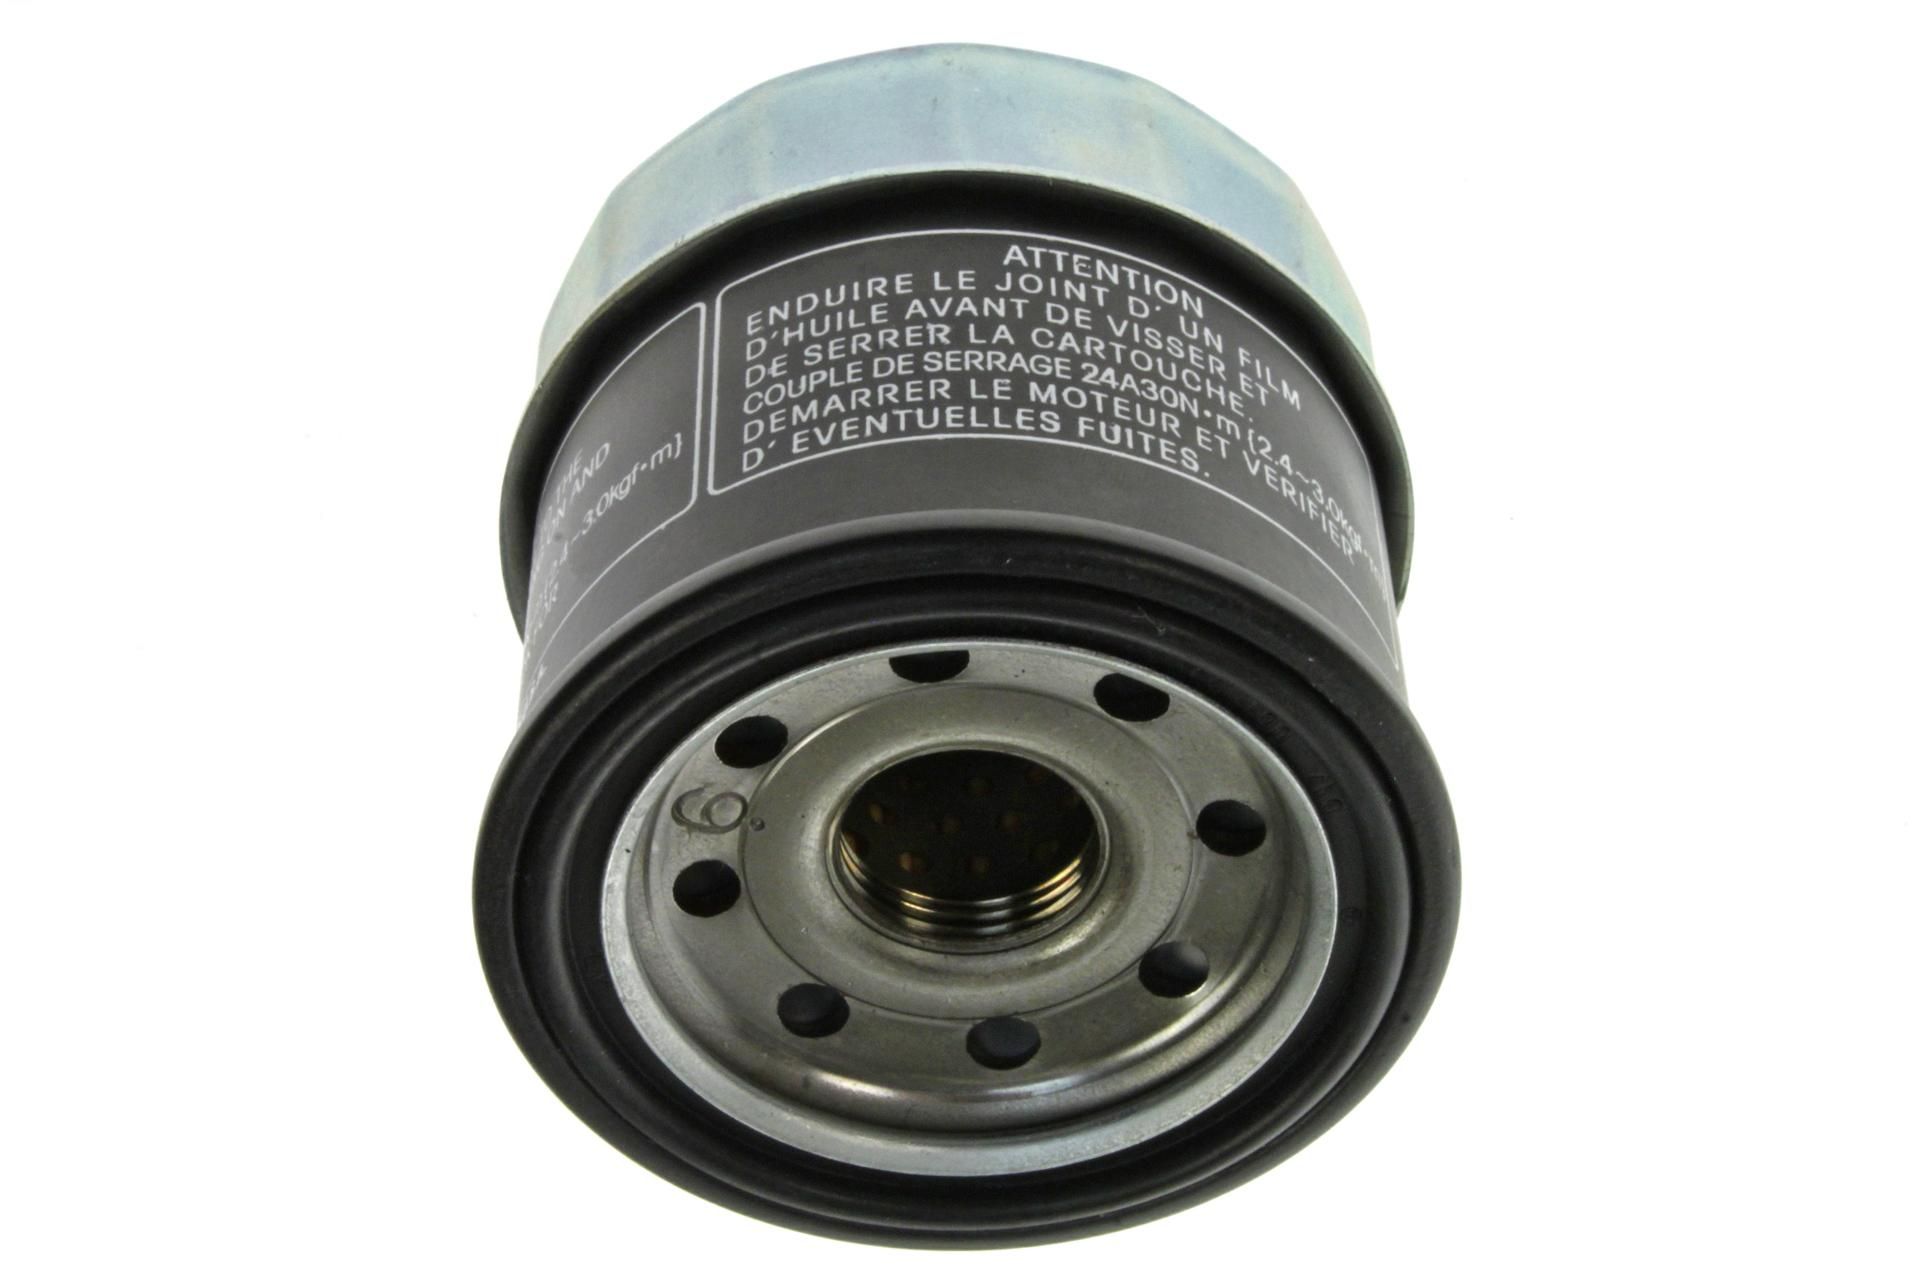 HONDA OEM OIL FILTER WITH REMOVAL TOOL 15010-MKR-305